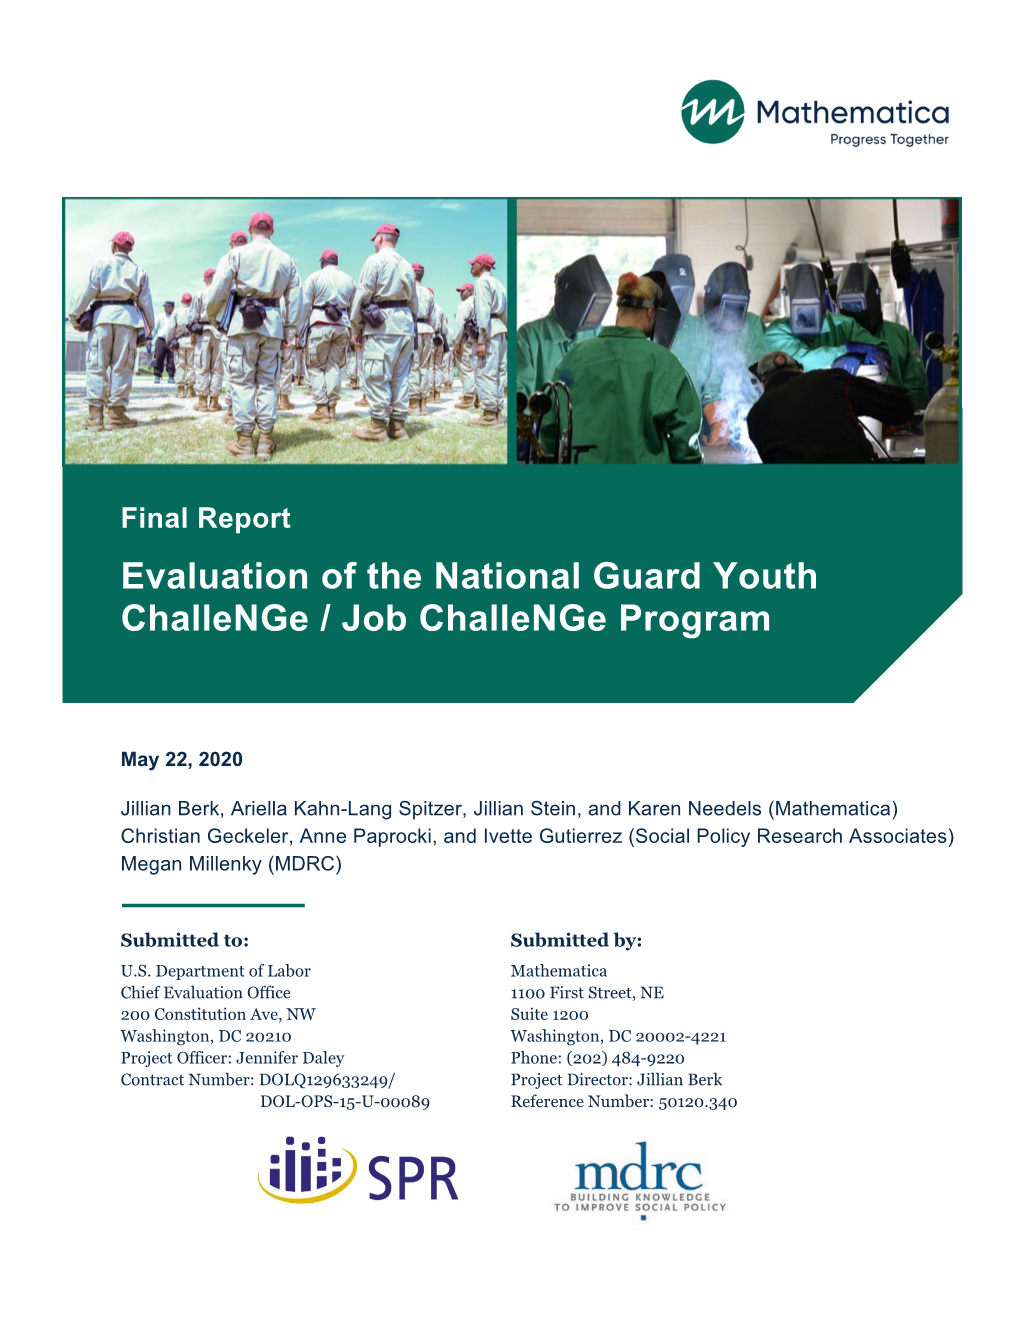 Evaluation of the National Guard Youth Challenge/Job Challenge Program, Final Report